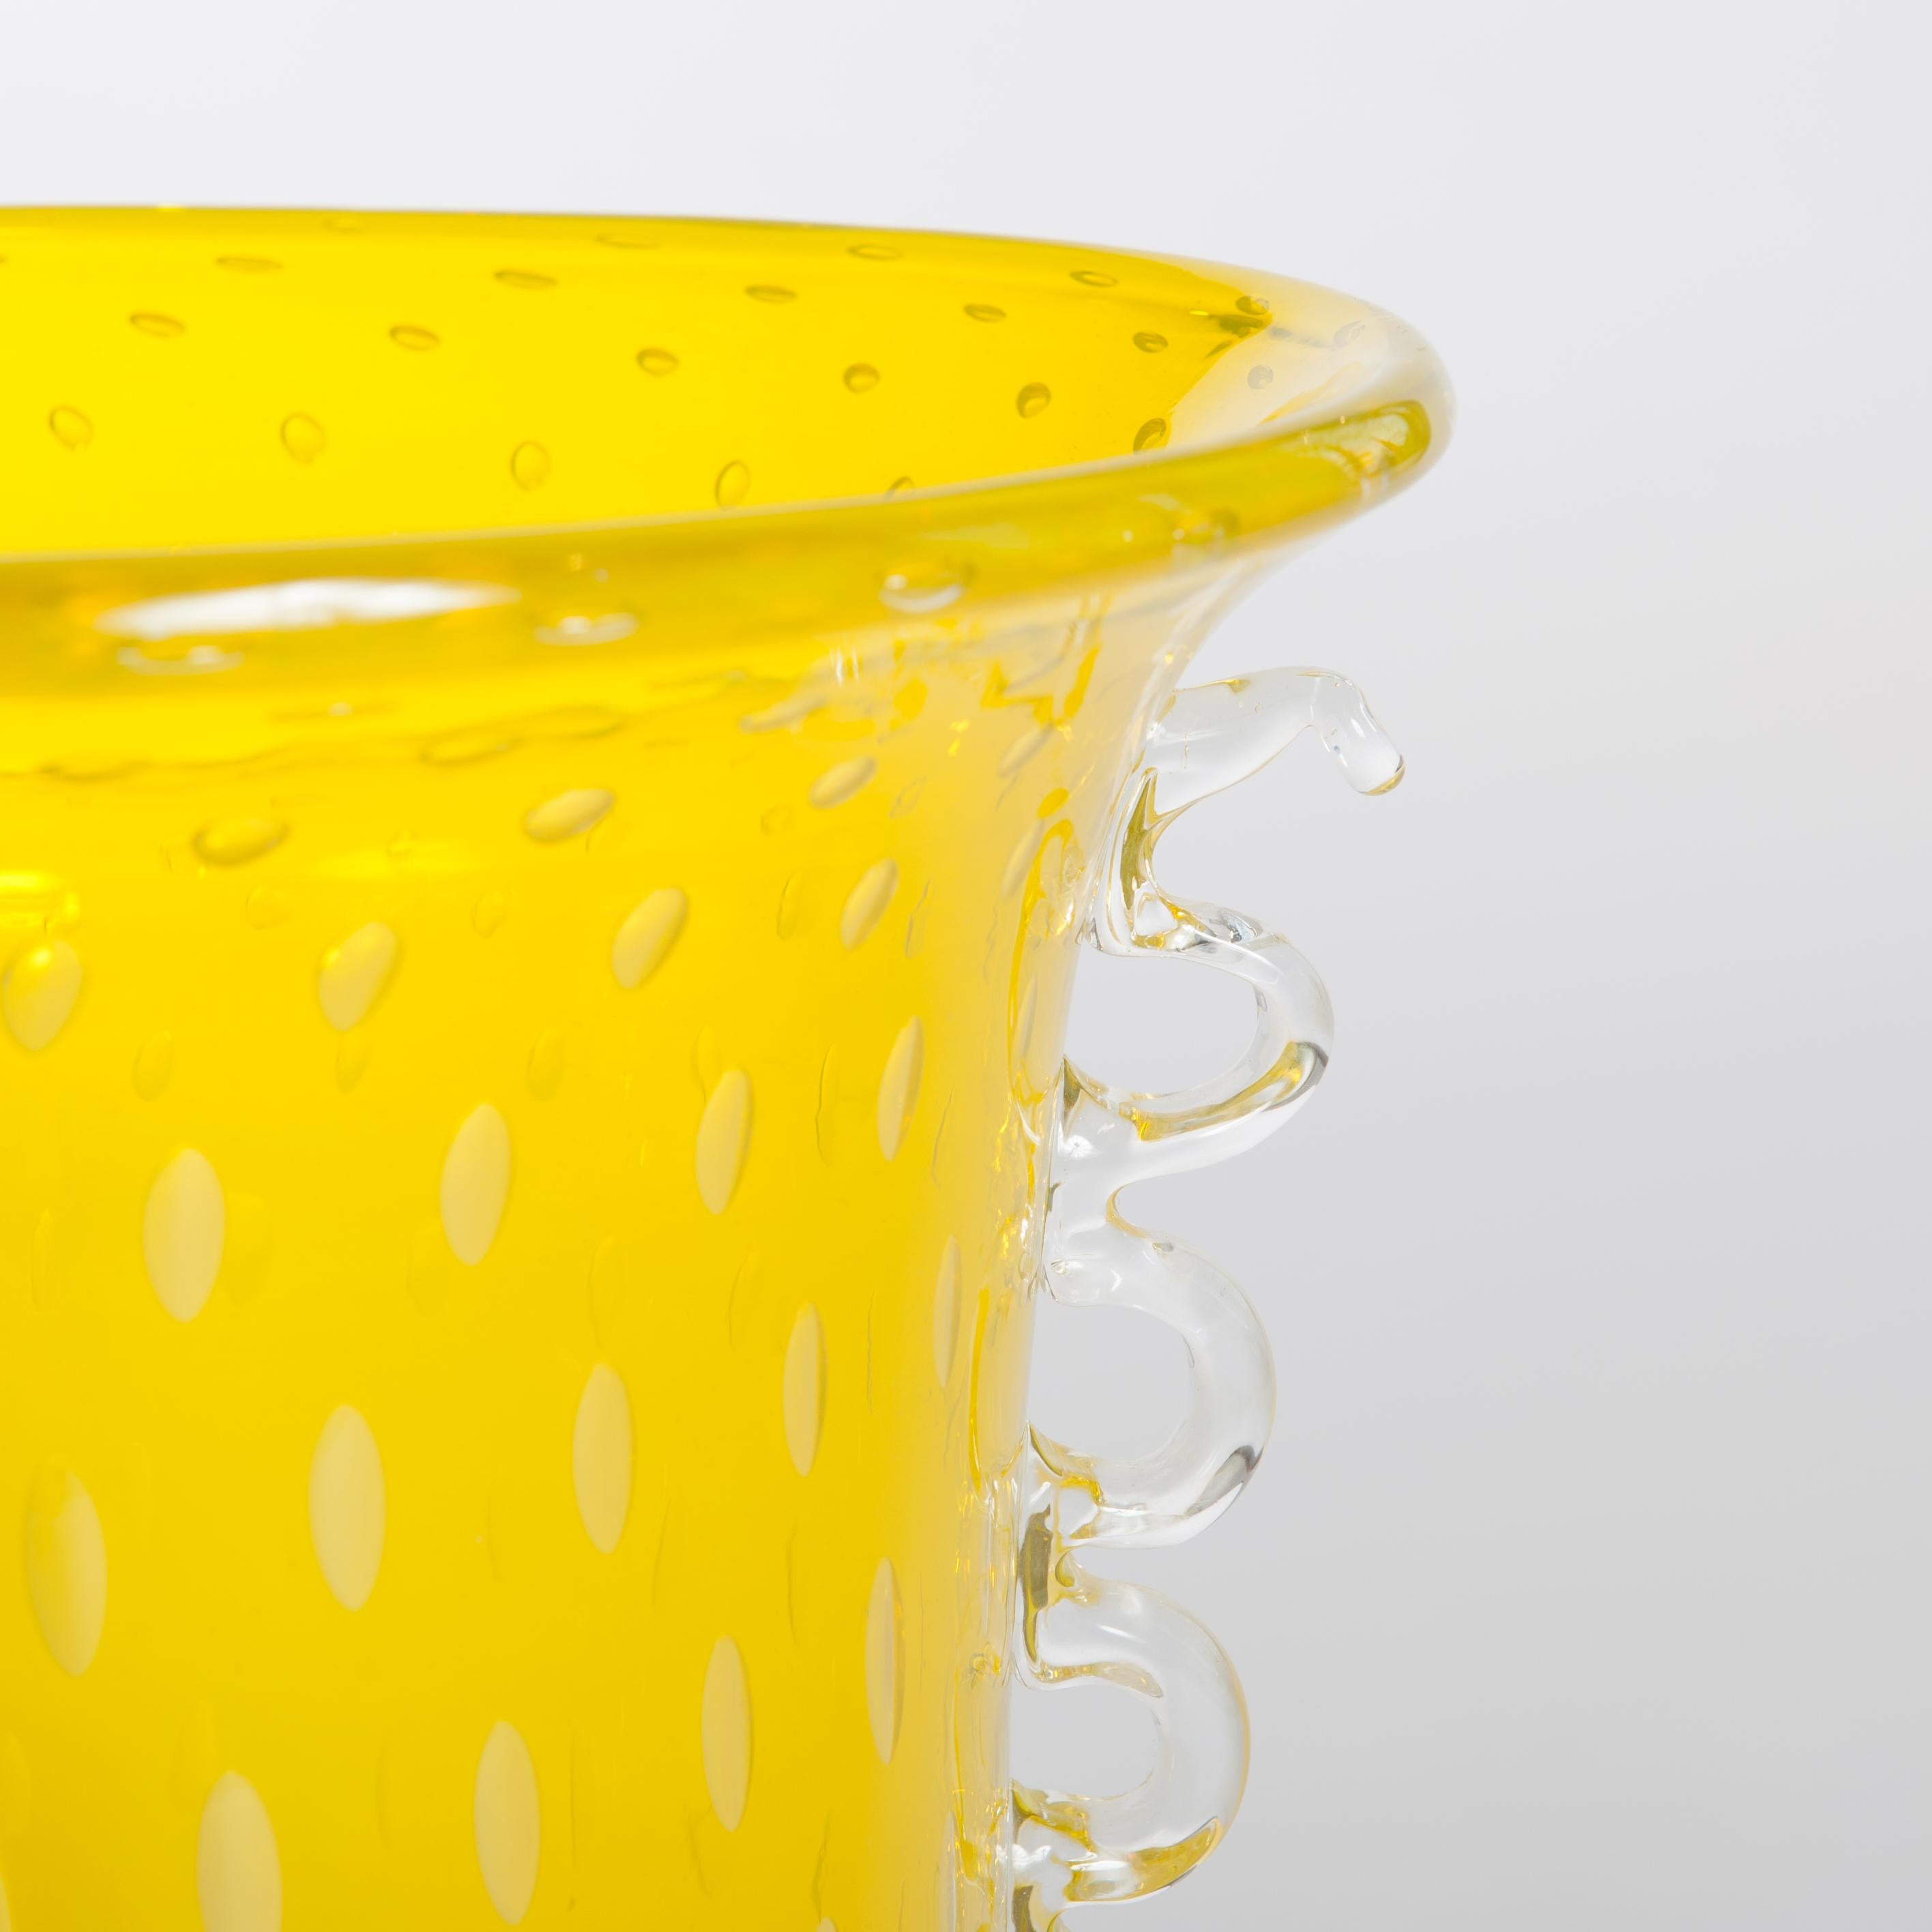 Amazing art glass vase in transparent-yellow color with transparent decorative handles.
The glass mass contains numerous bubbles - the technique is called 